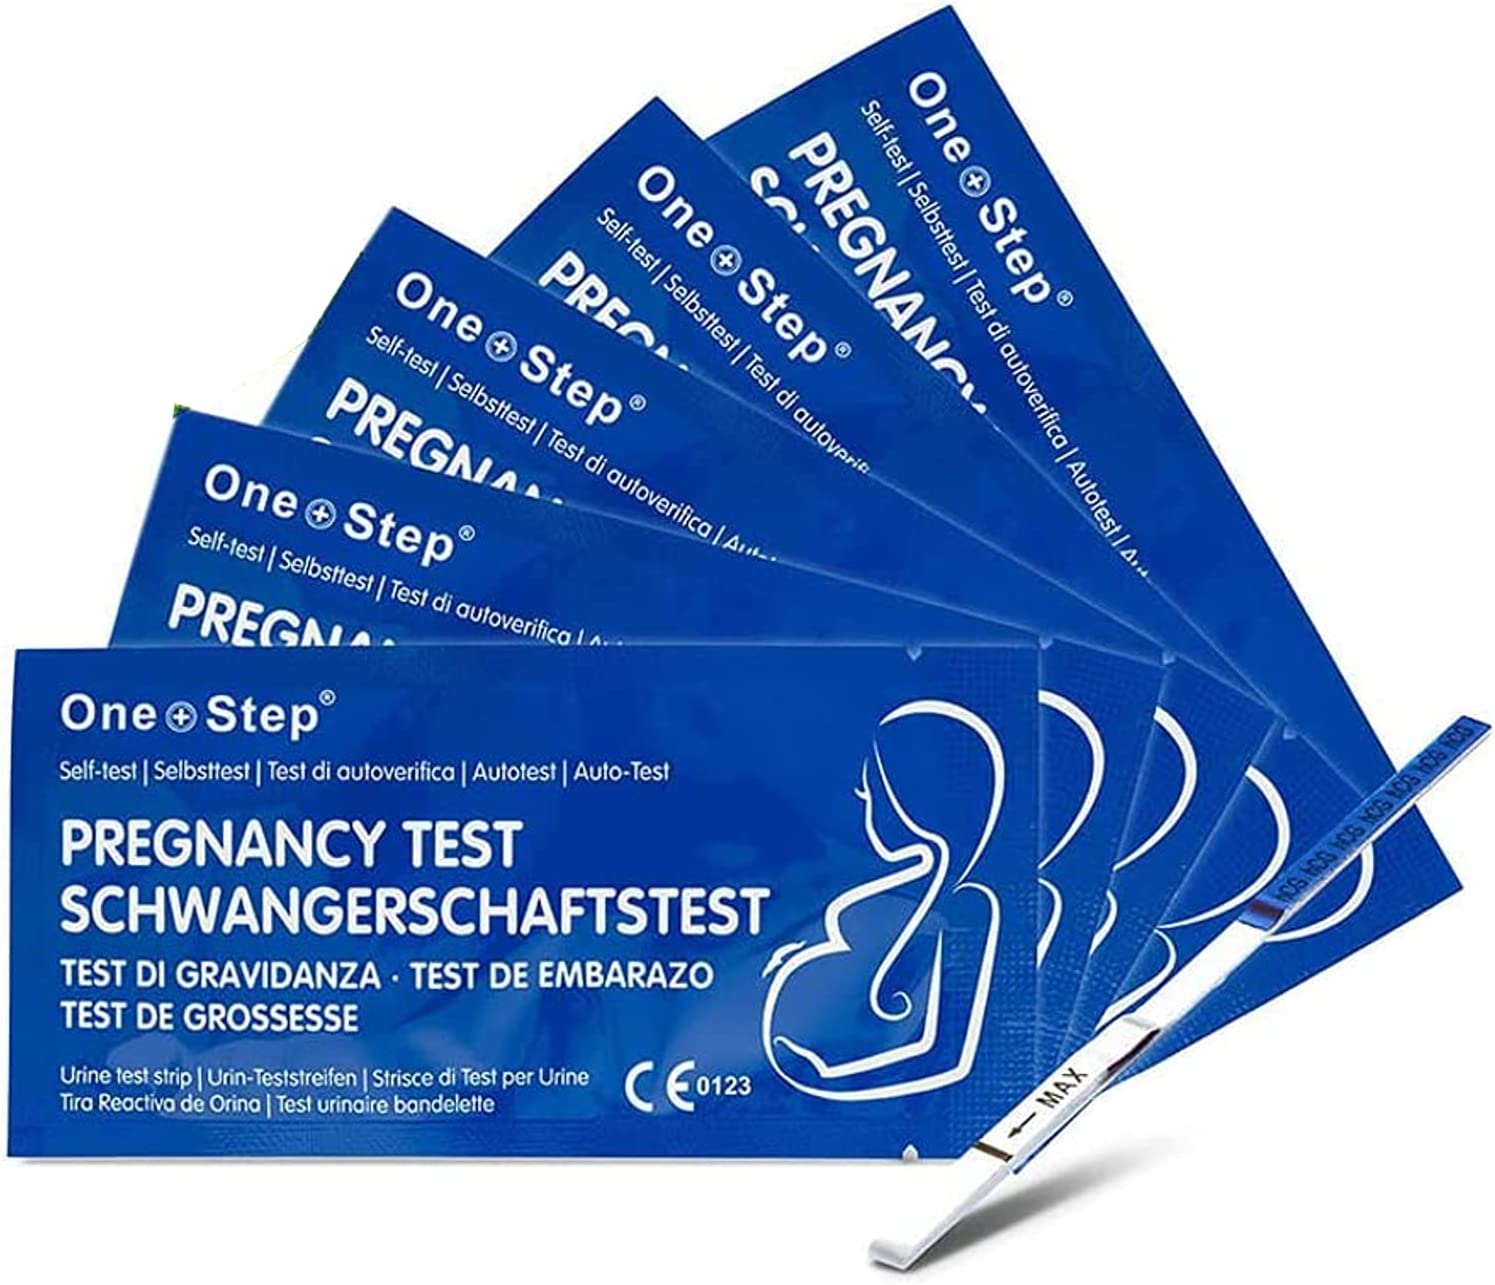 One Step: 20 x Highly Sensitive 10mIU Pregnancy Test Strips RRP £2.99 CLEARANCE XL £1.99